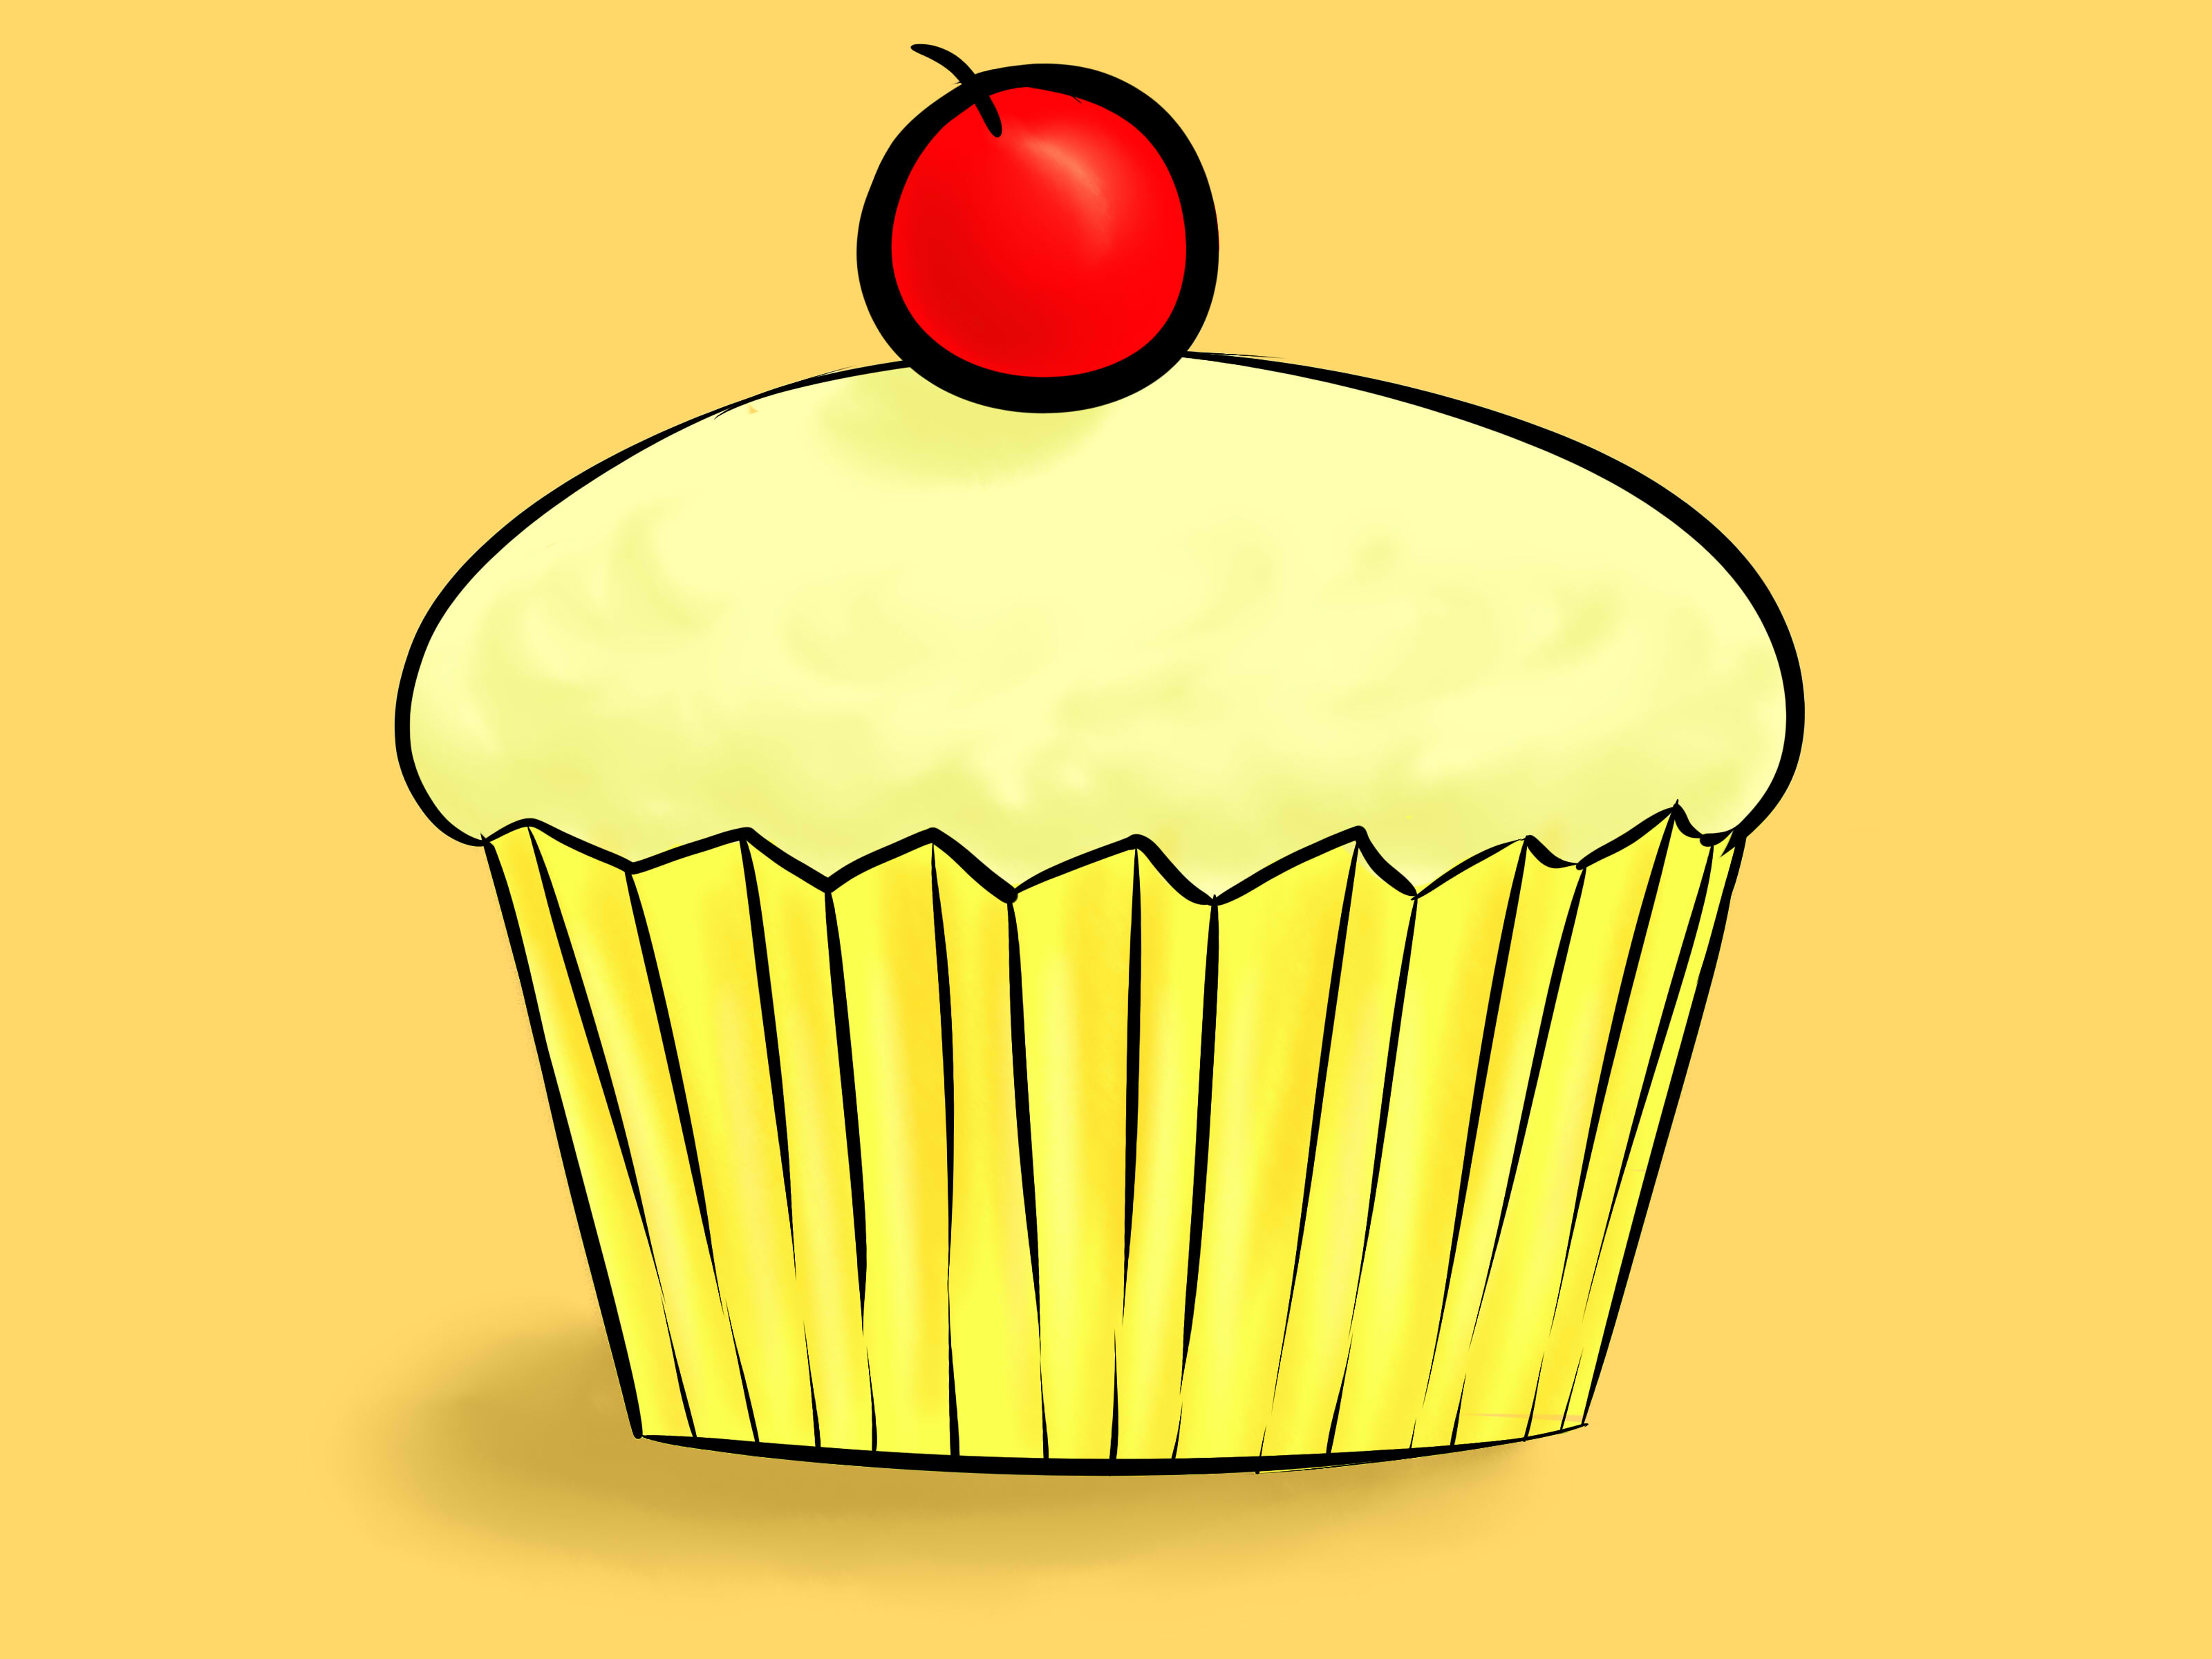 Cupcake Drawing With A Cherry - ClipArt Best